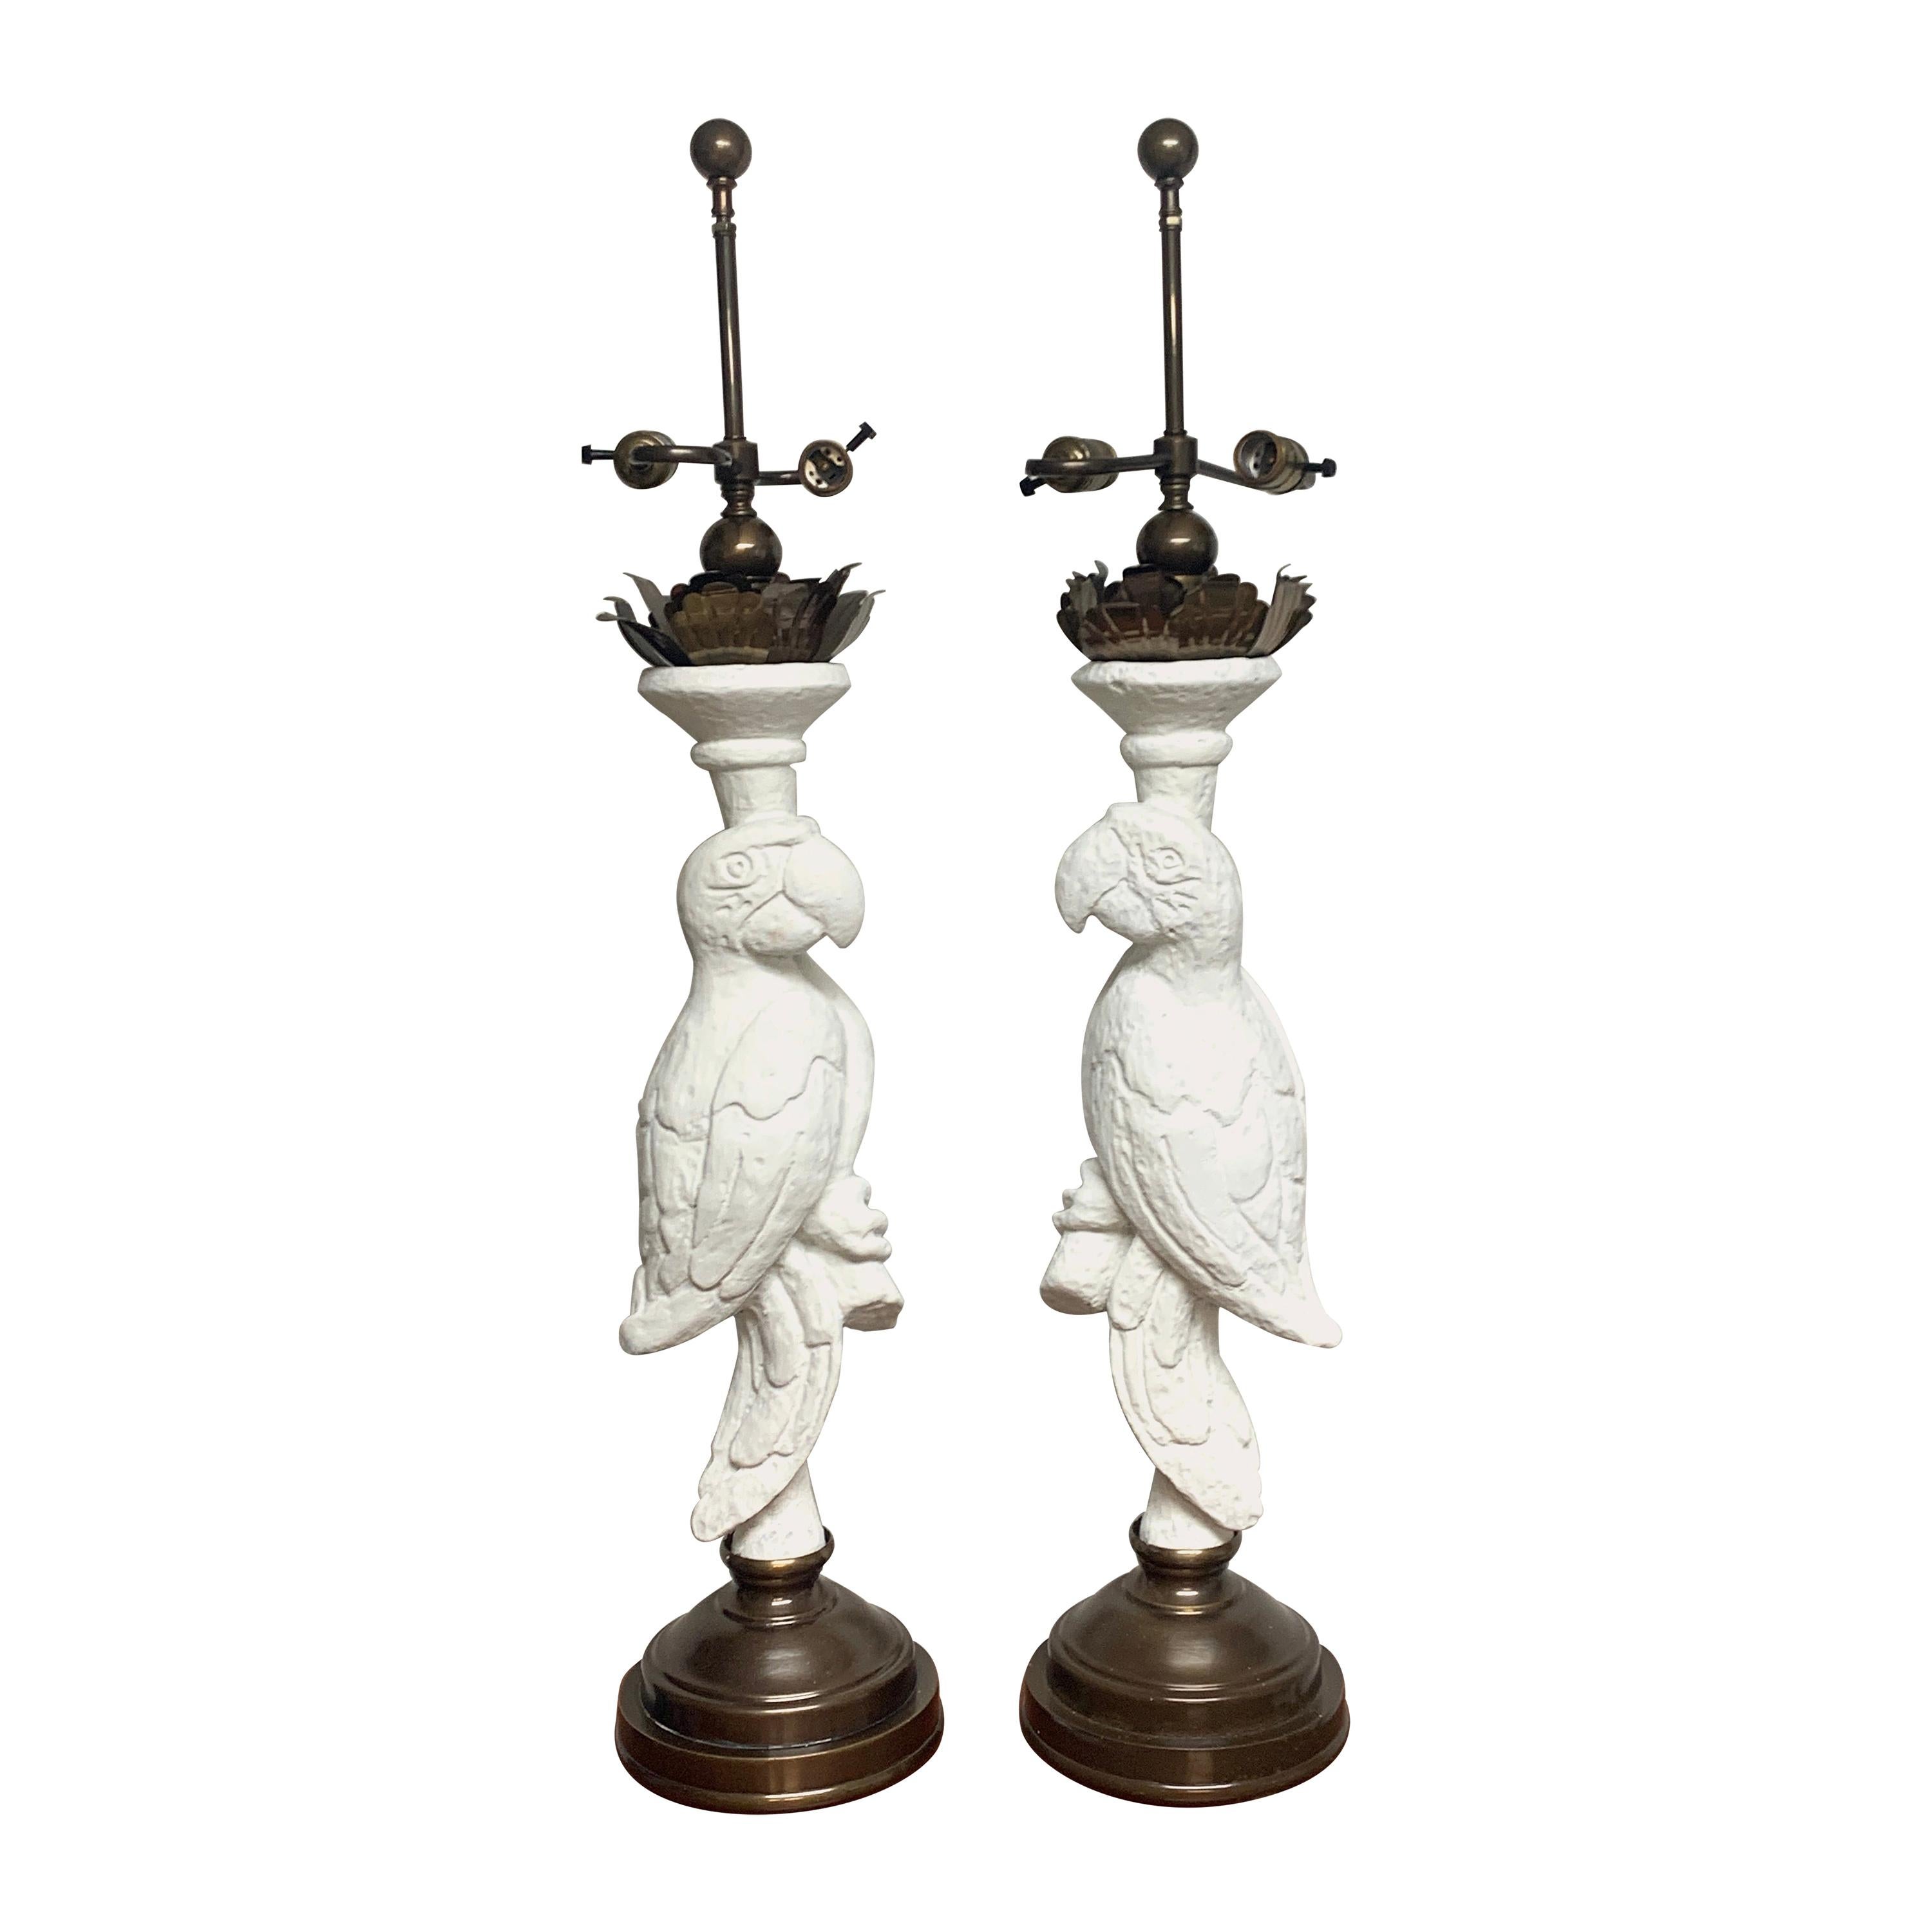 Pair of White Lacquered and Brass Parrot Lamps, Style of Serge Roche